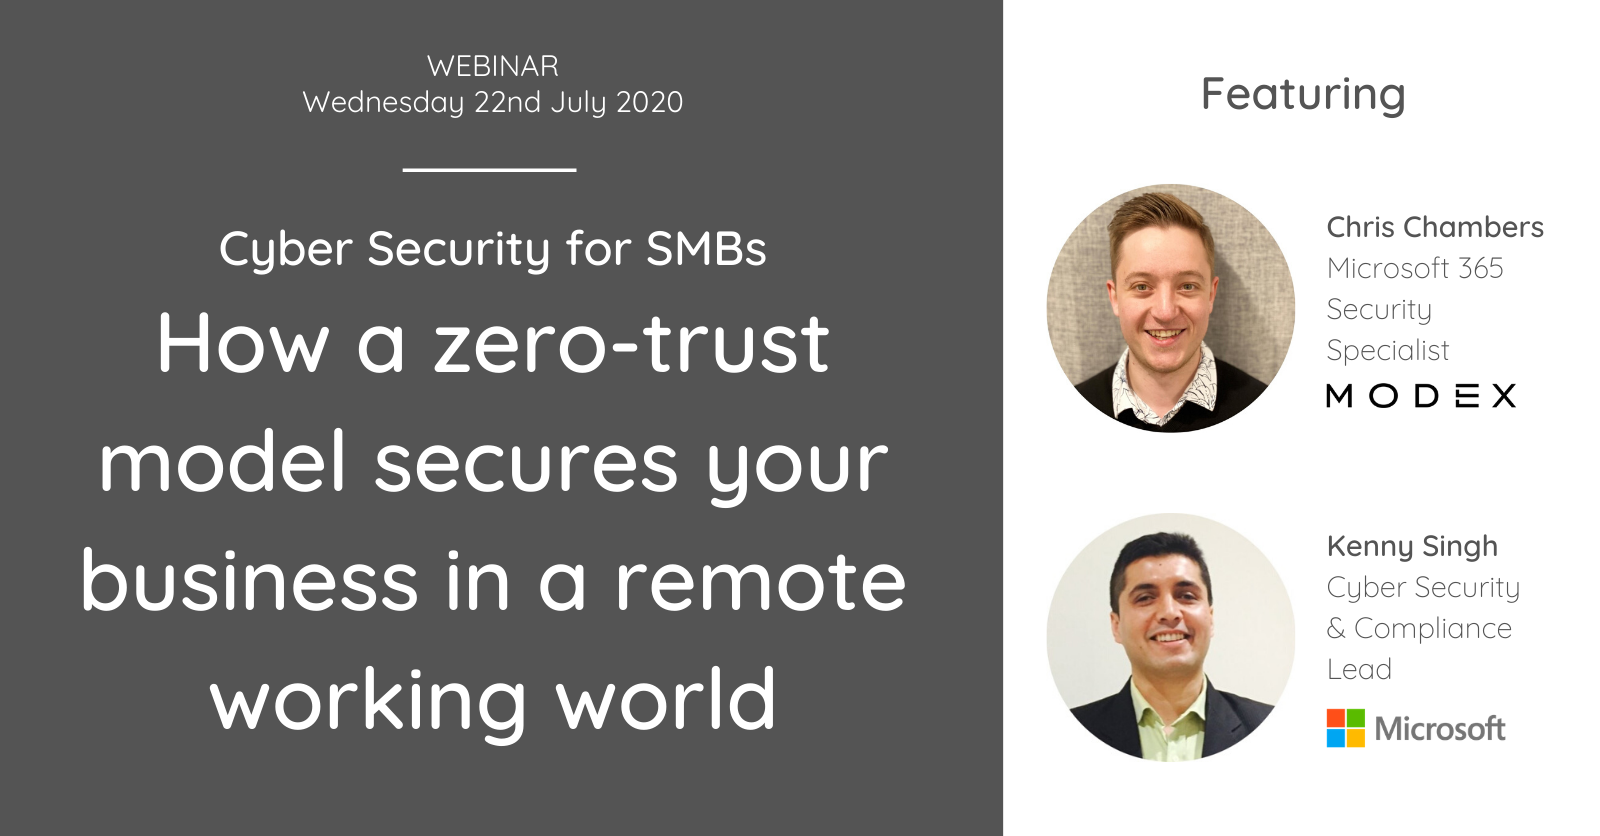 Event banner: How a zero-trust model secures your business in a remote working world featuring a photo of two male presenters, Chris Chambers from MODEX and Kenny Singh from Microsoft